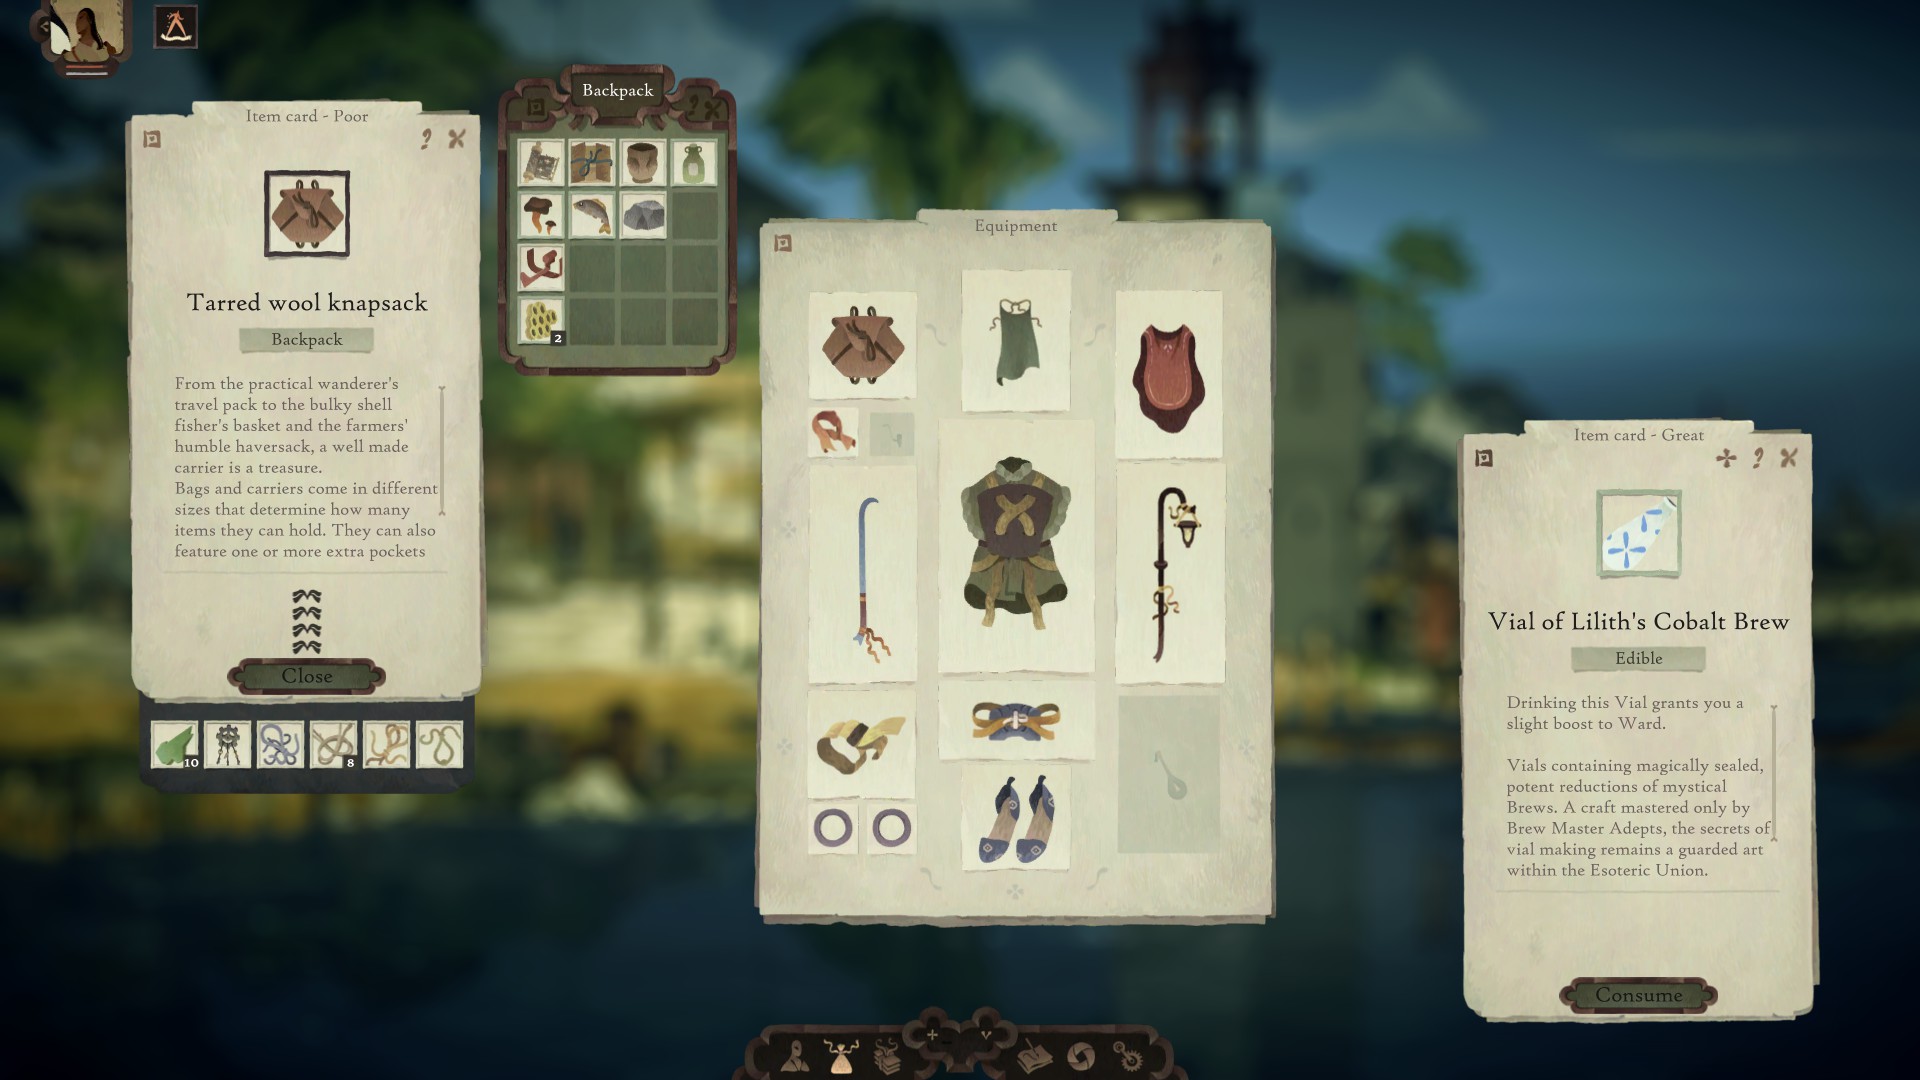 Book of Travels - A player's various inventory screens over top of the world blurred in the background. They are wearing armor, carrying a sword and lantern, and a backpack. Inside the backpack are six more inventory slots. The item card for a special vial of tea is also being viewed.